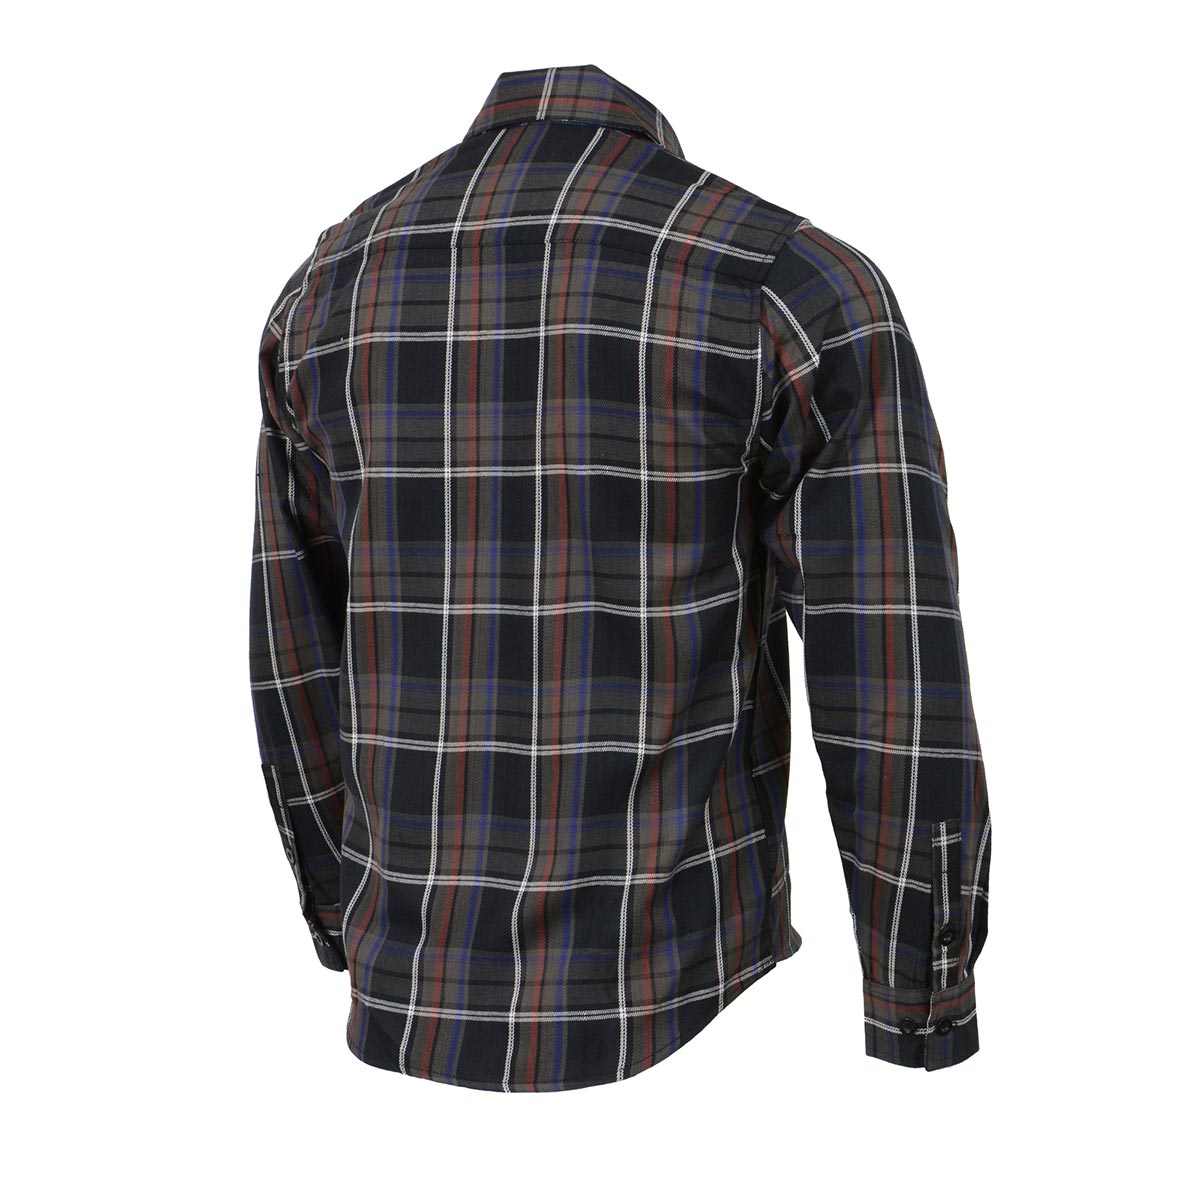 Milwaukee Leather MNG11637 Men's Black, Purple, Grey and Red Long Sleeve Cotton Flannel Shirt